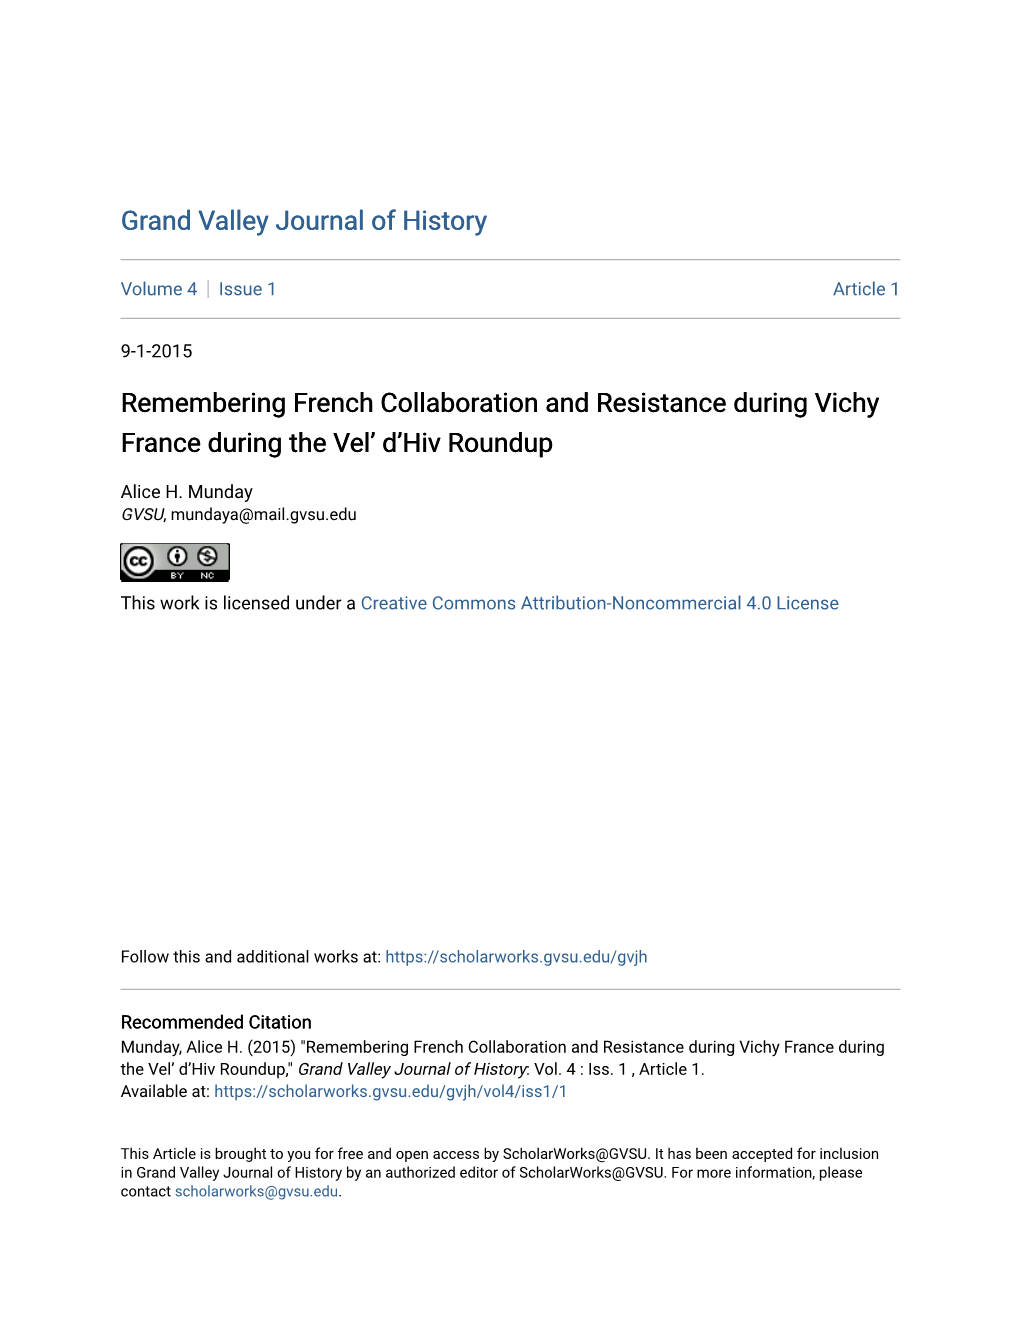 Remembering French Collaboration and Resistance During Vichy France During the Vel’ D’Hiv Roundup